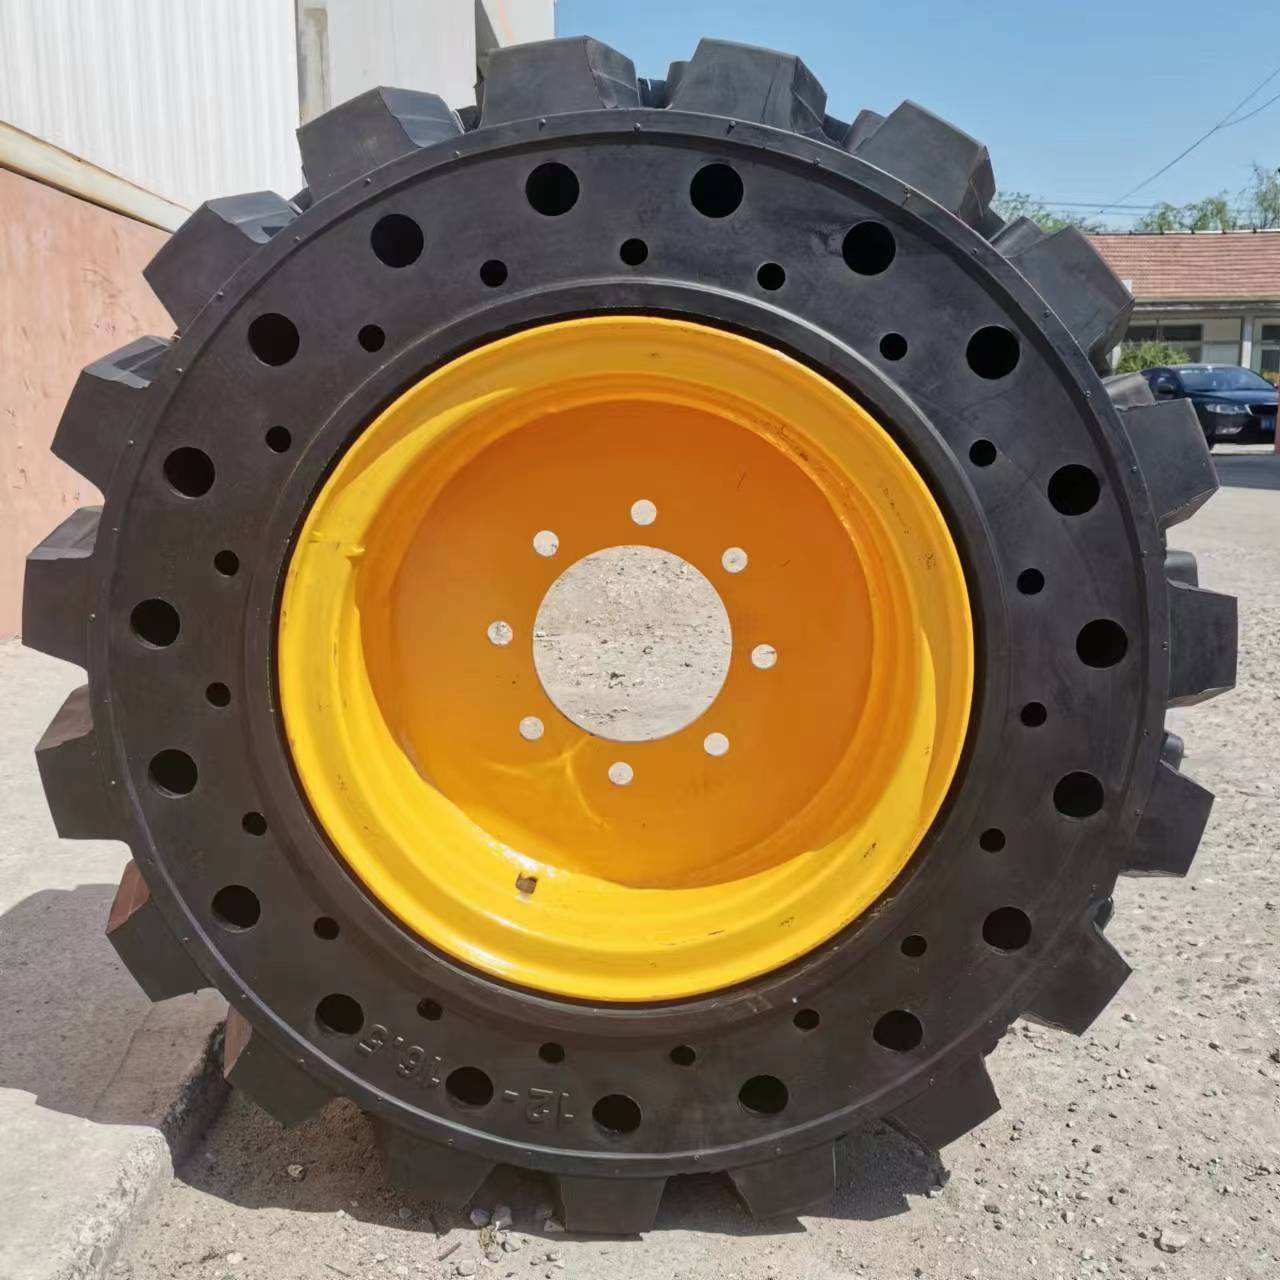 16/70-20,30x10-16,10-16.5,12-16.5, 20.5/70-16,205/70-16 ,hight quality solid otr wheel loader/earth mover tire 